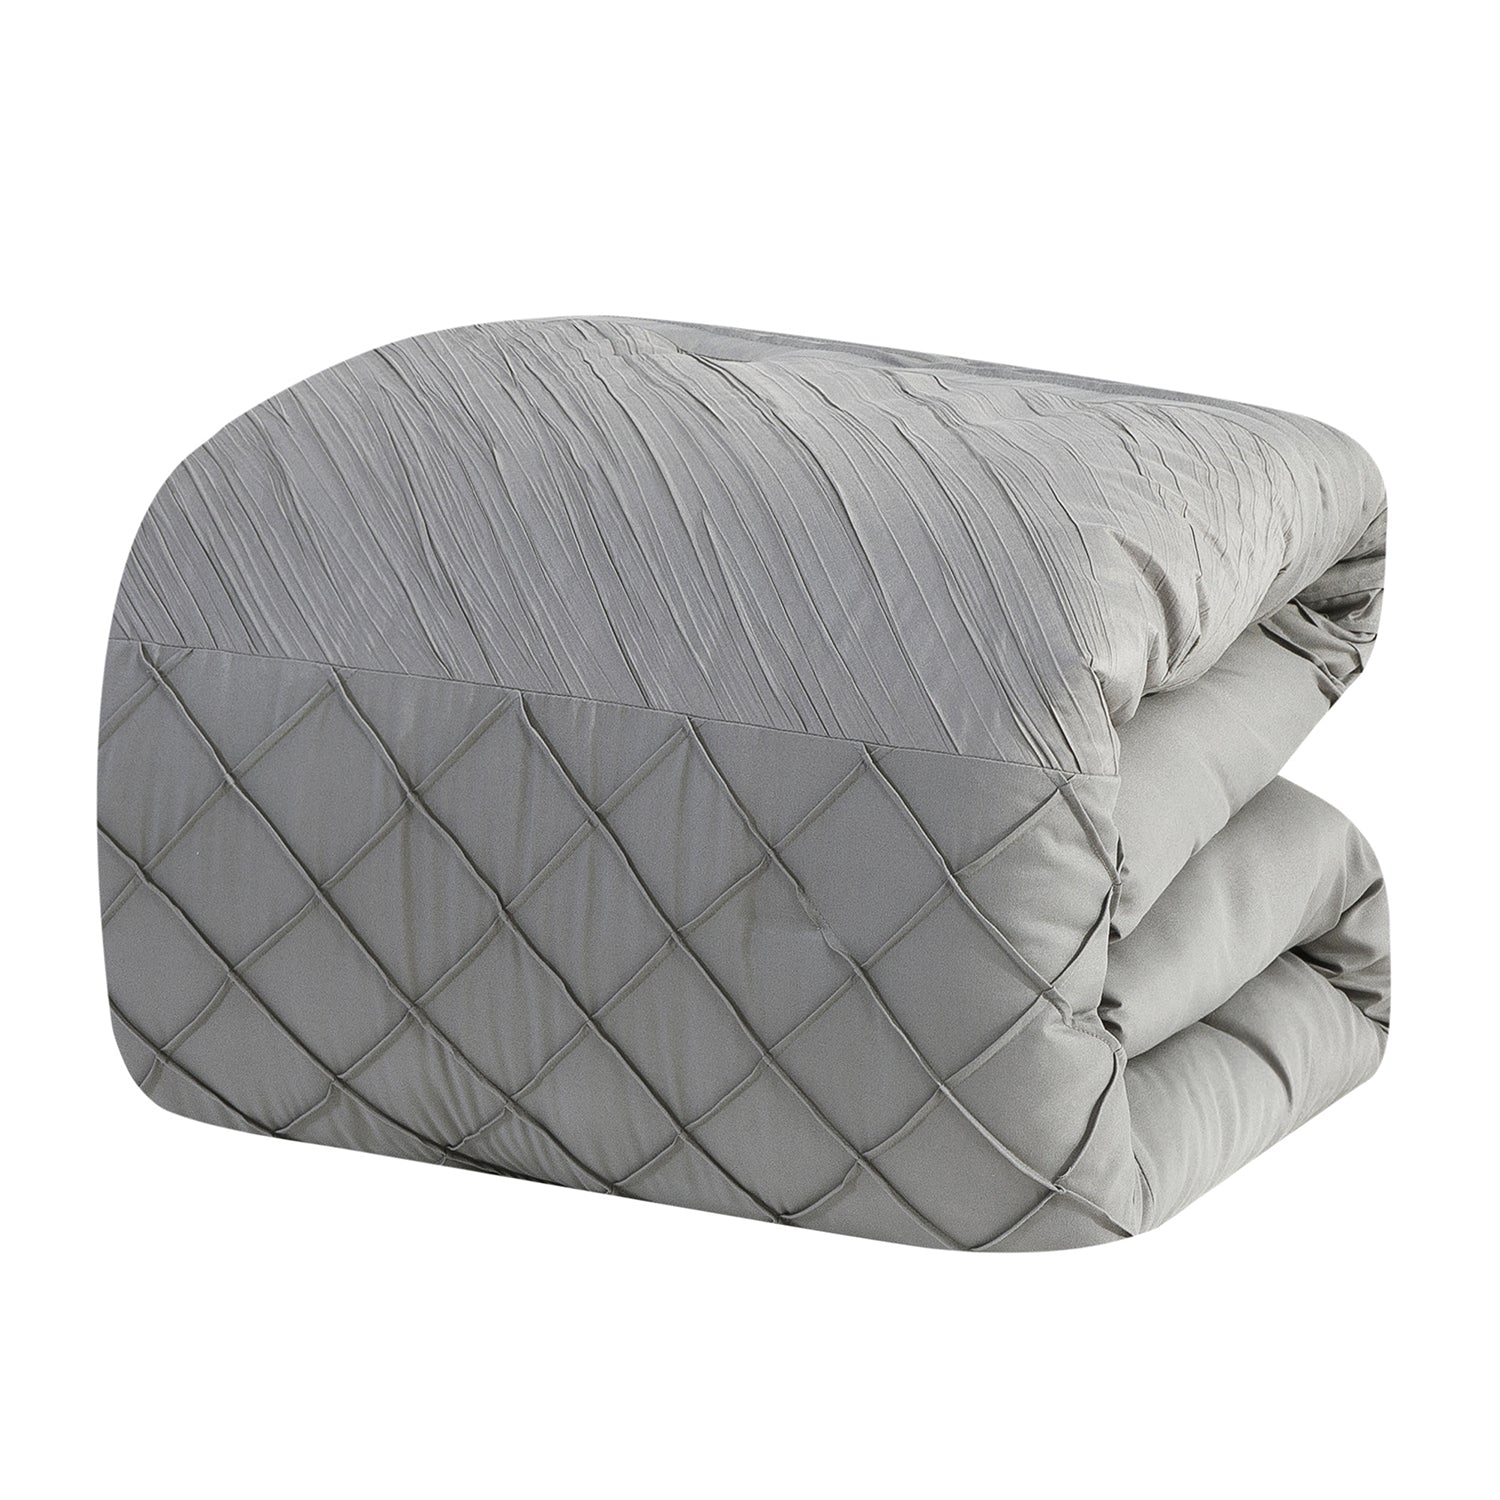 Primolo 7PC BEDDING GRAY COMFORTER SET. RUFFLE & PATCHWORK, MICROFIBER FABRIC, FADE RESISTANT, SUPER SOFT, BED IN A BAG